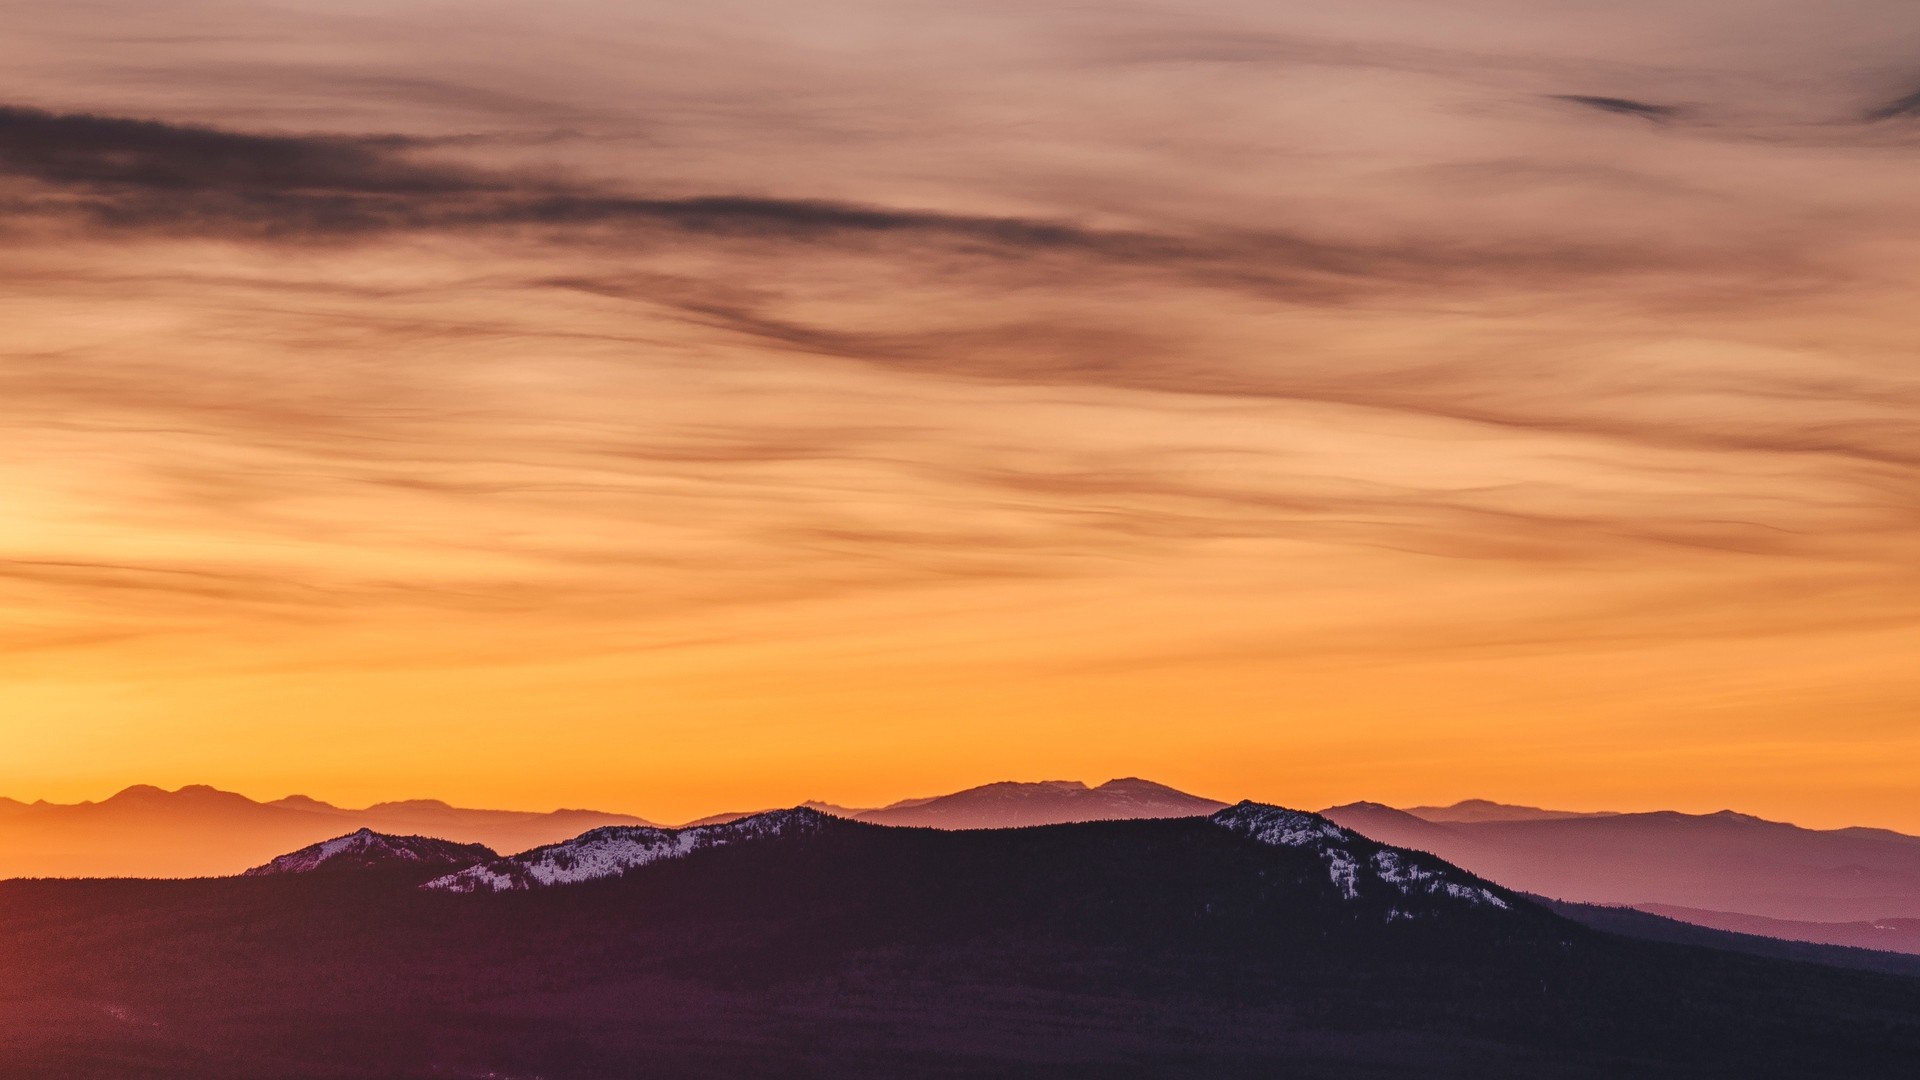 1920x1080 wallpapers: mountains, field, sky, sunset (image)